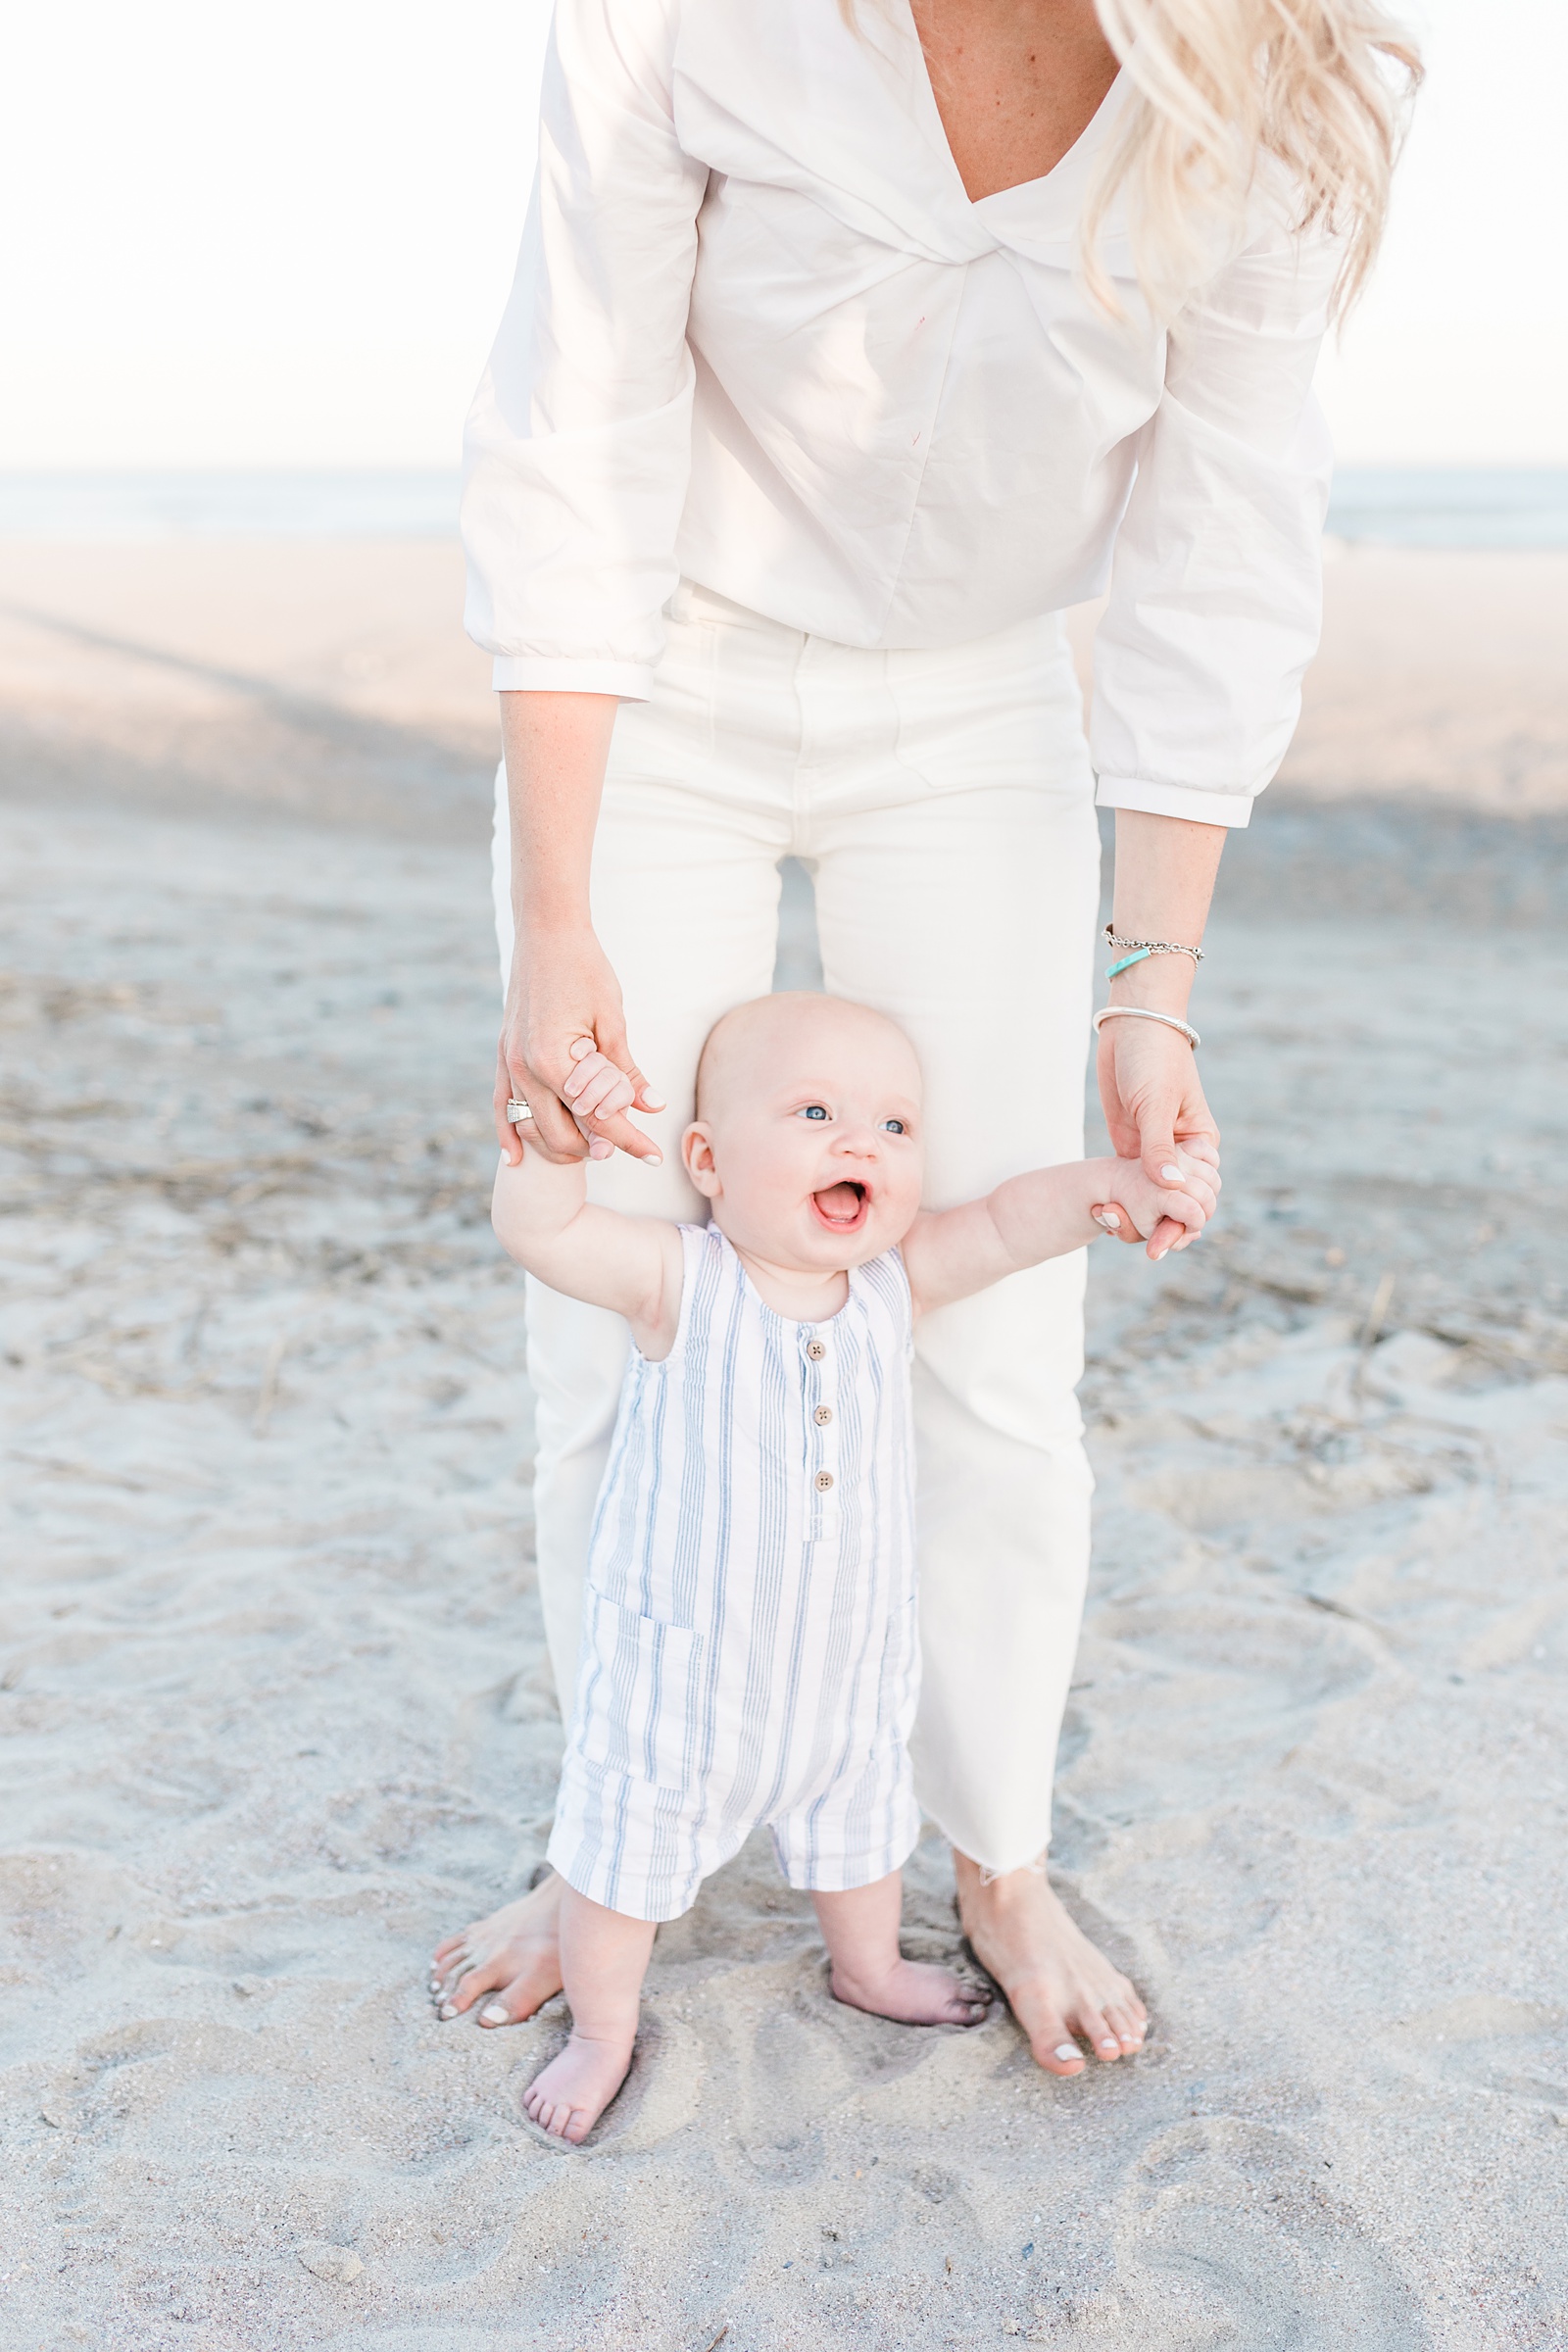 Infant on beach during extended family session on Isle of Palms beach by Charleston Family Photographer, Caitlyn Motycka Photography